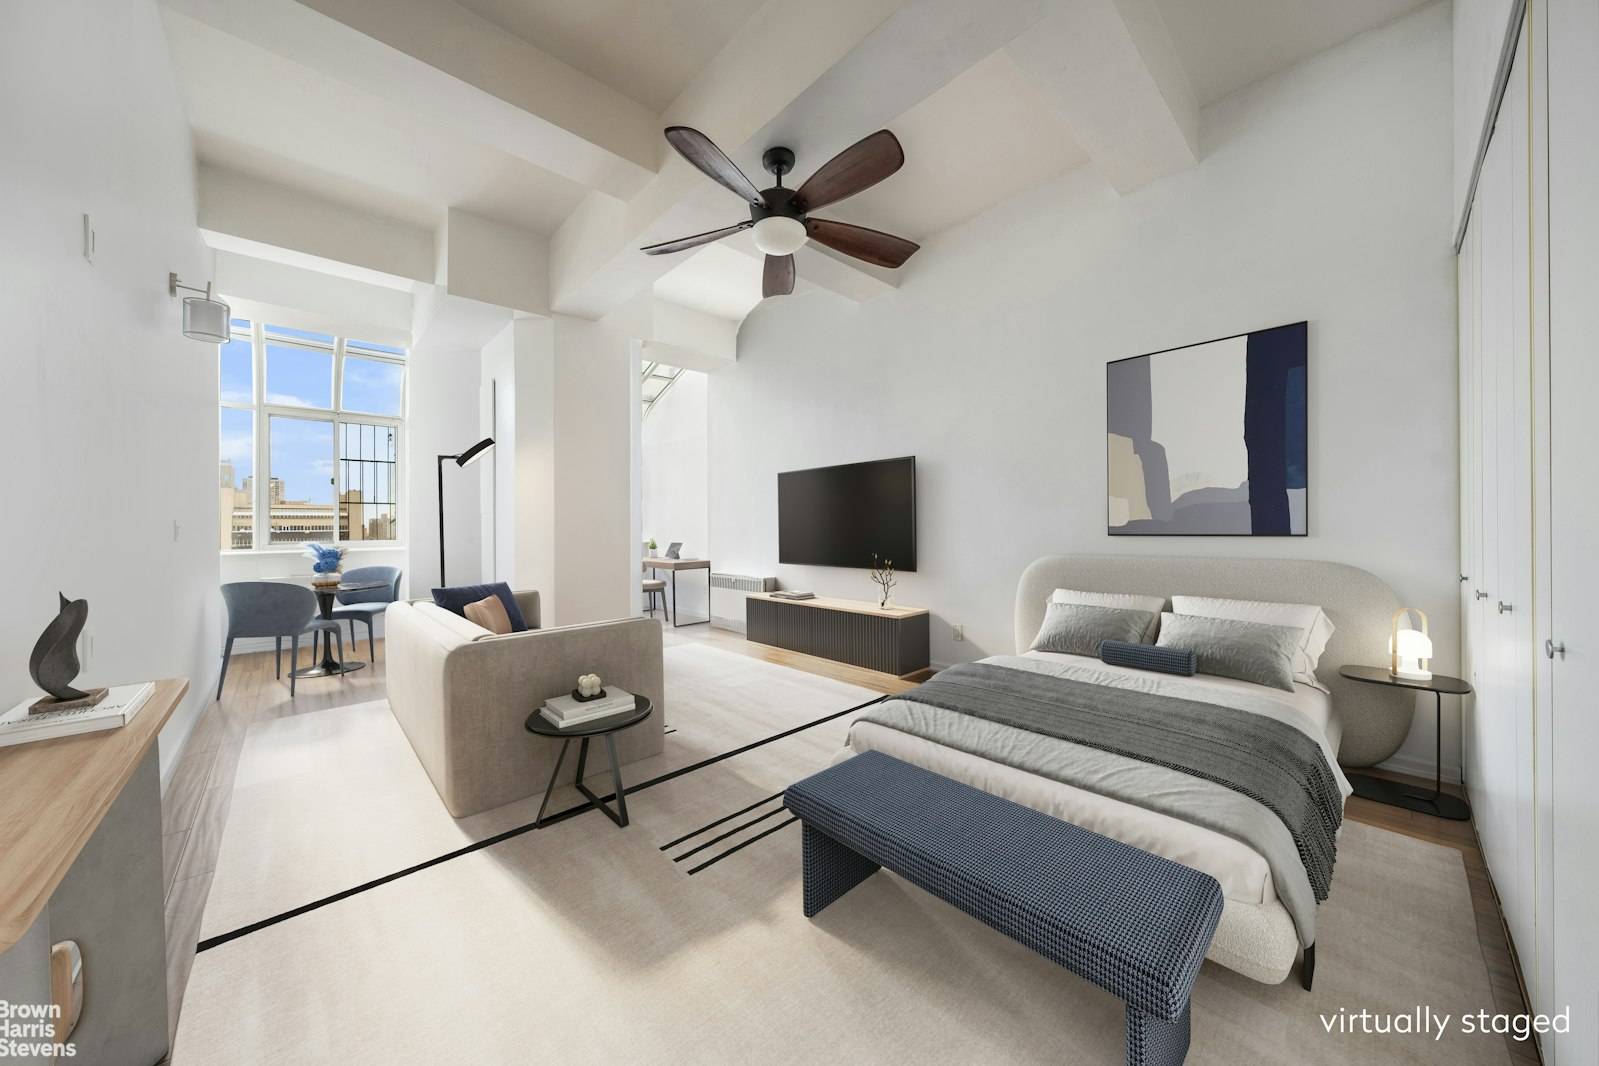 Welcome home to the pinnacle of luxury living in the heart of Turtle Bay, offering an exquisite blend of classic charm and modern flair at 310 East 46th Street, Unit ...